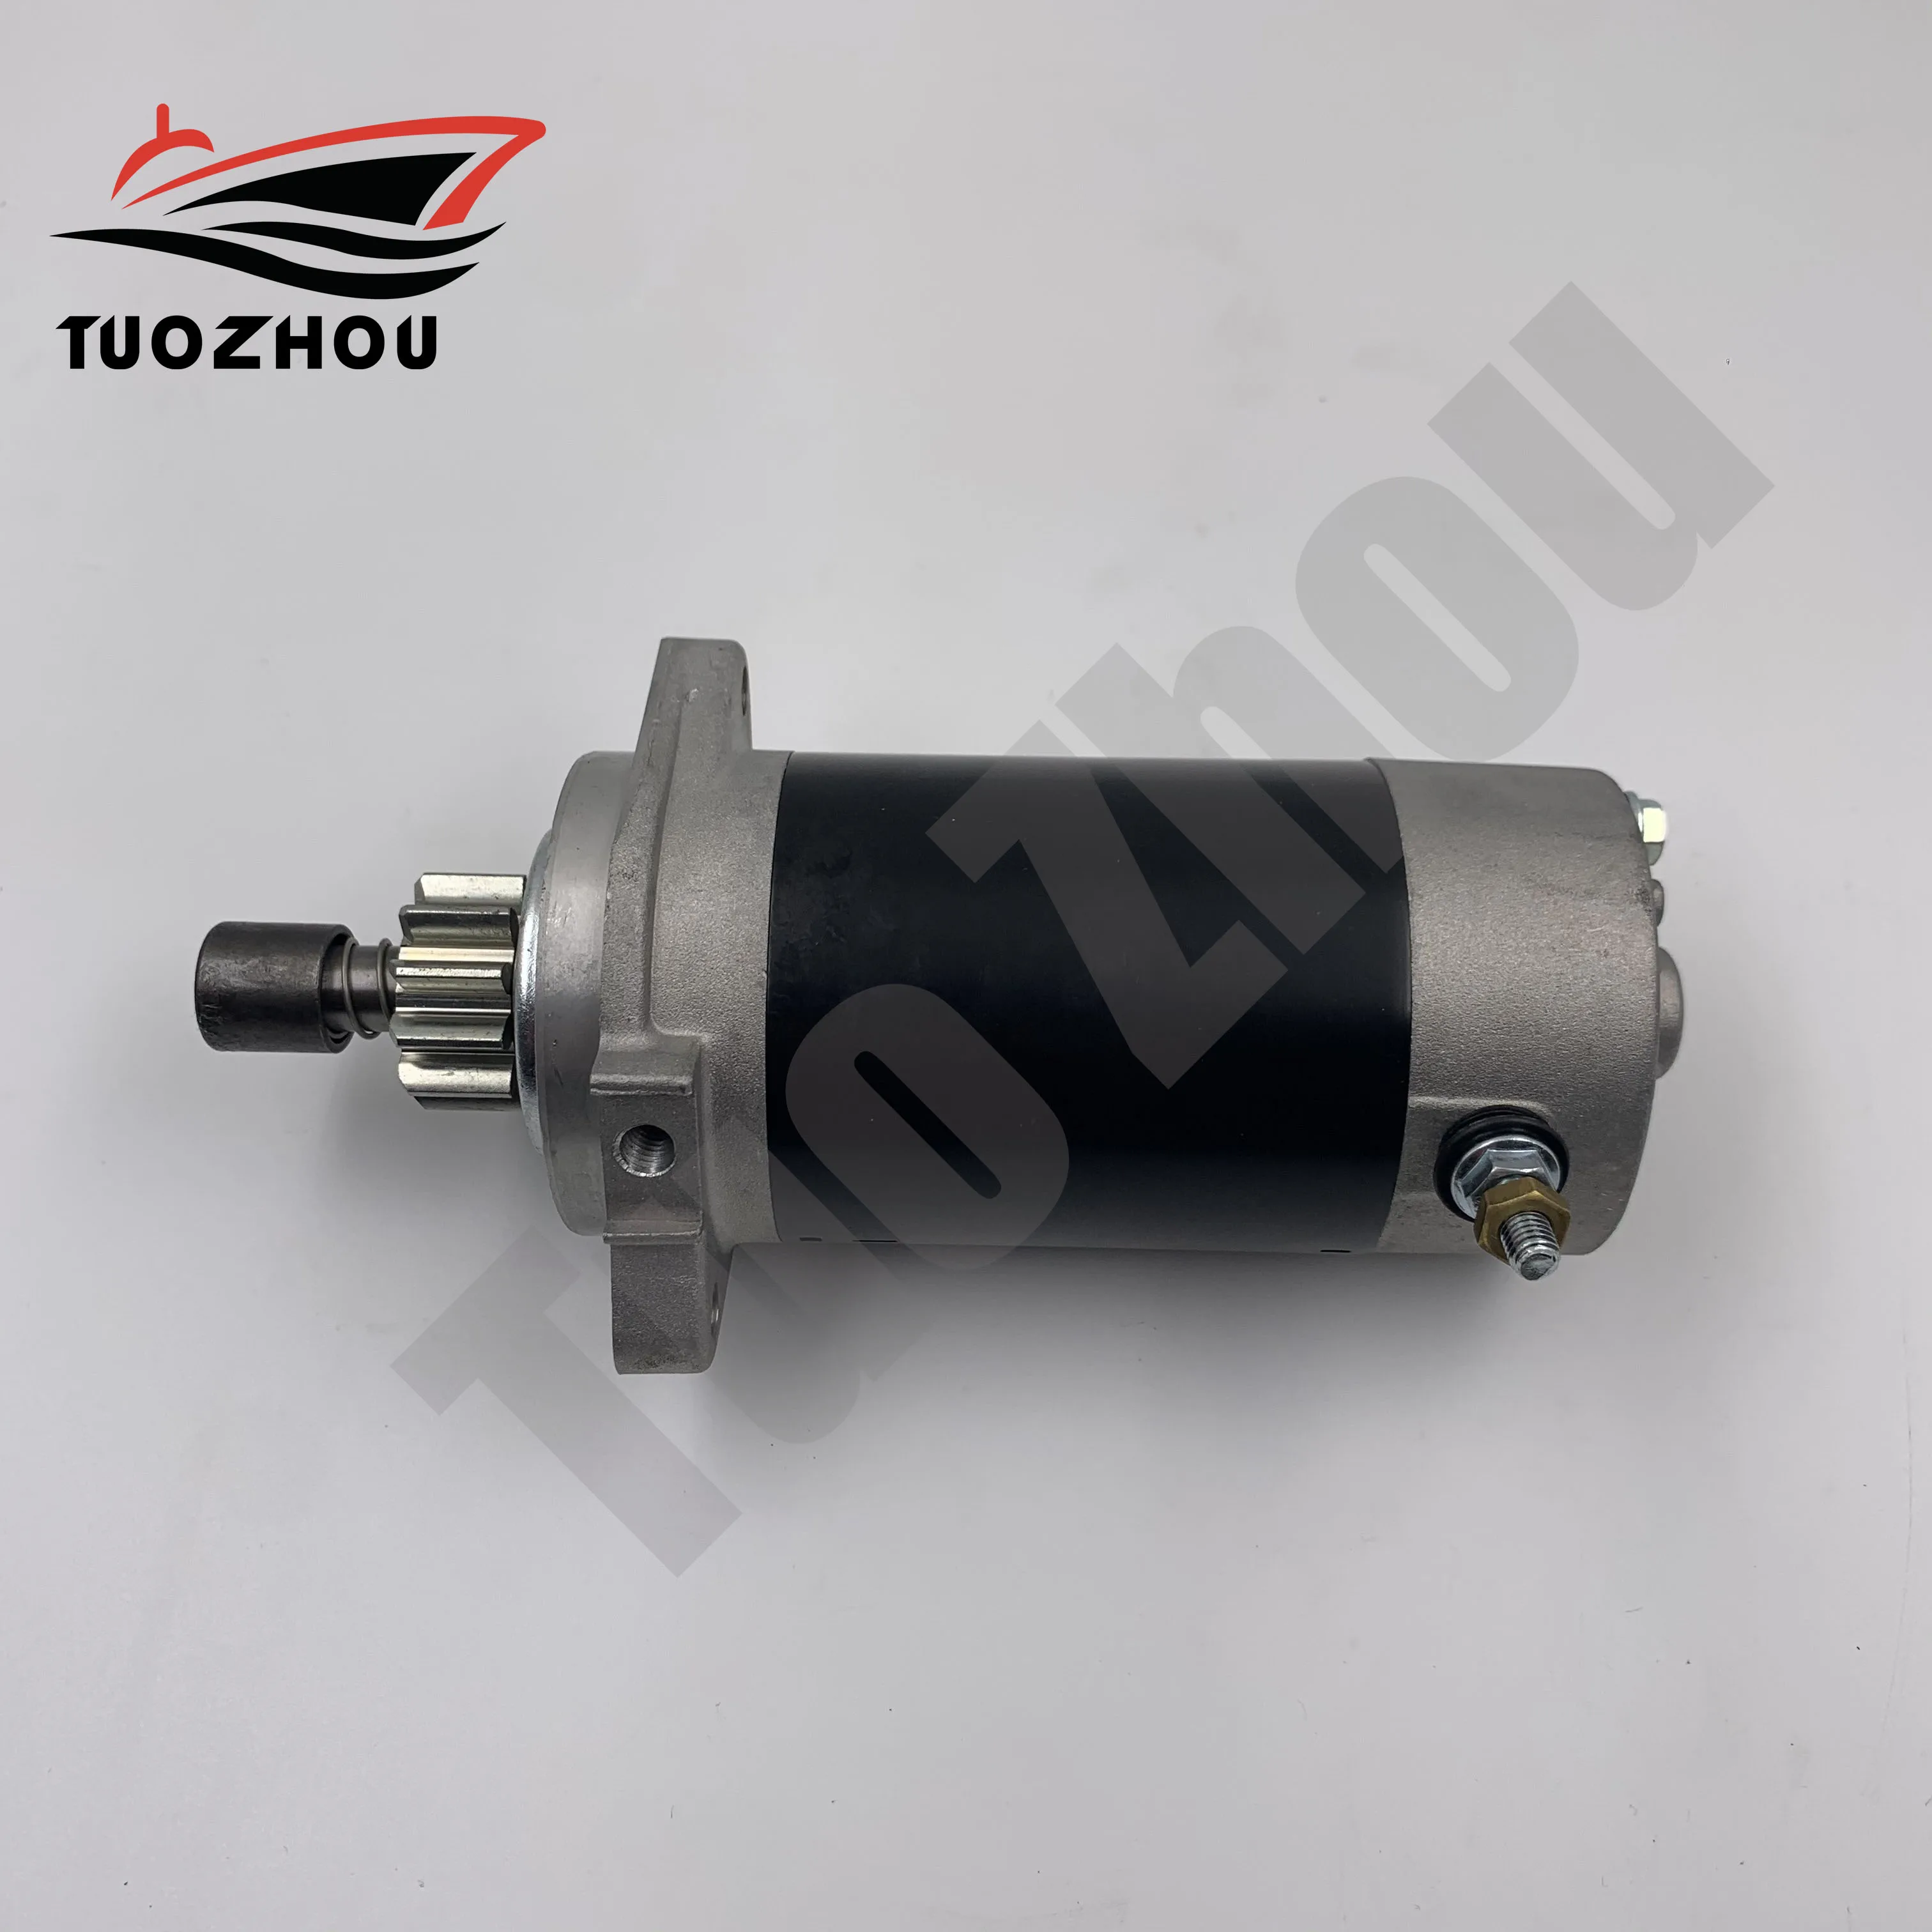 689-81800-13 Outboard Motor Starter For YAMAHA Outboard Engine T30 689-81800-13 starting motor assy